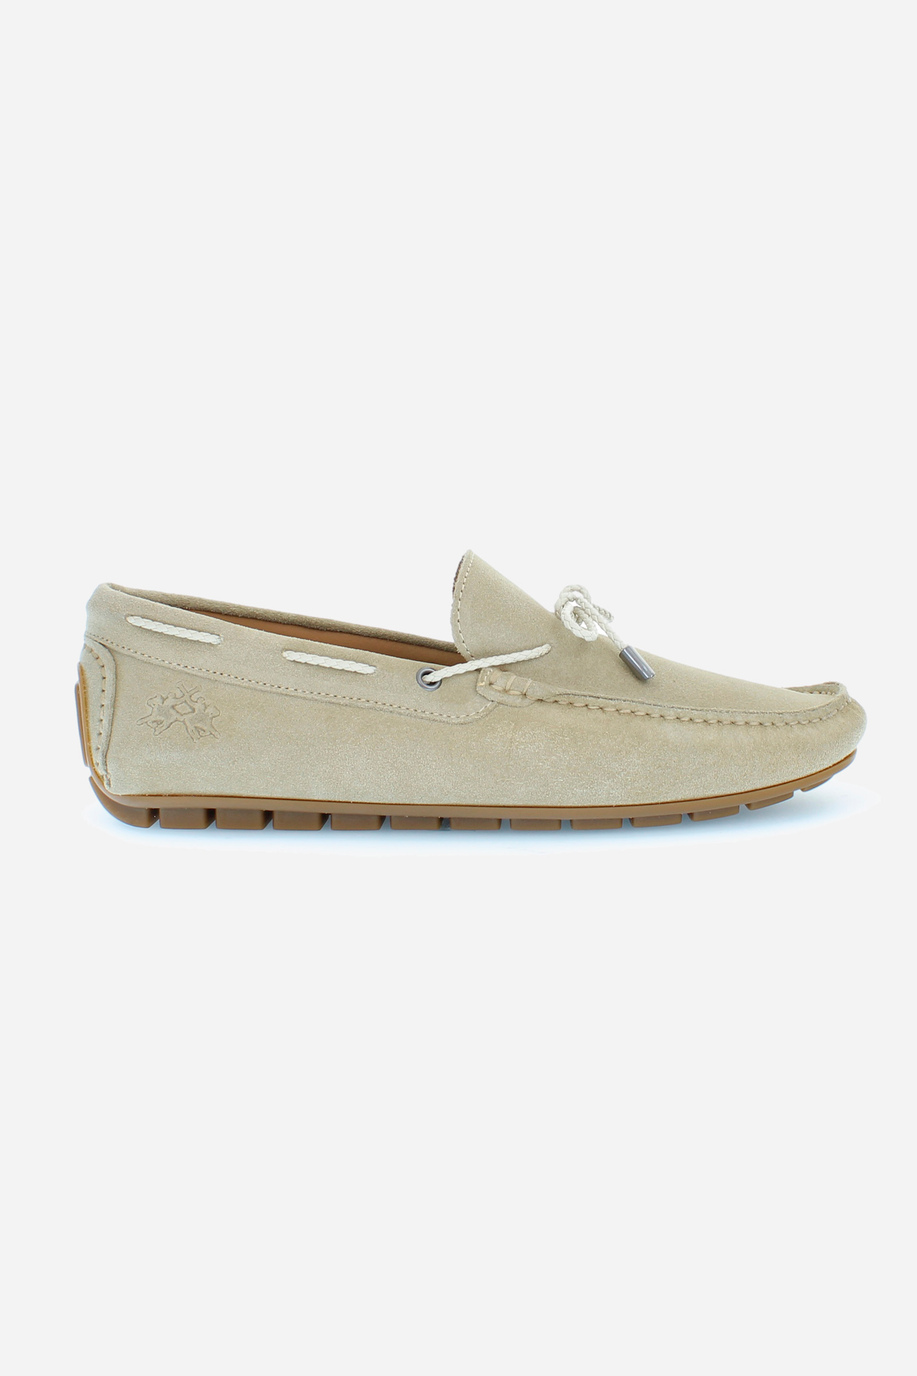 Men's suede loafers with laces - Shoes and Accessories | La Martina - Official Online Shop